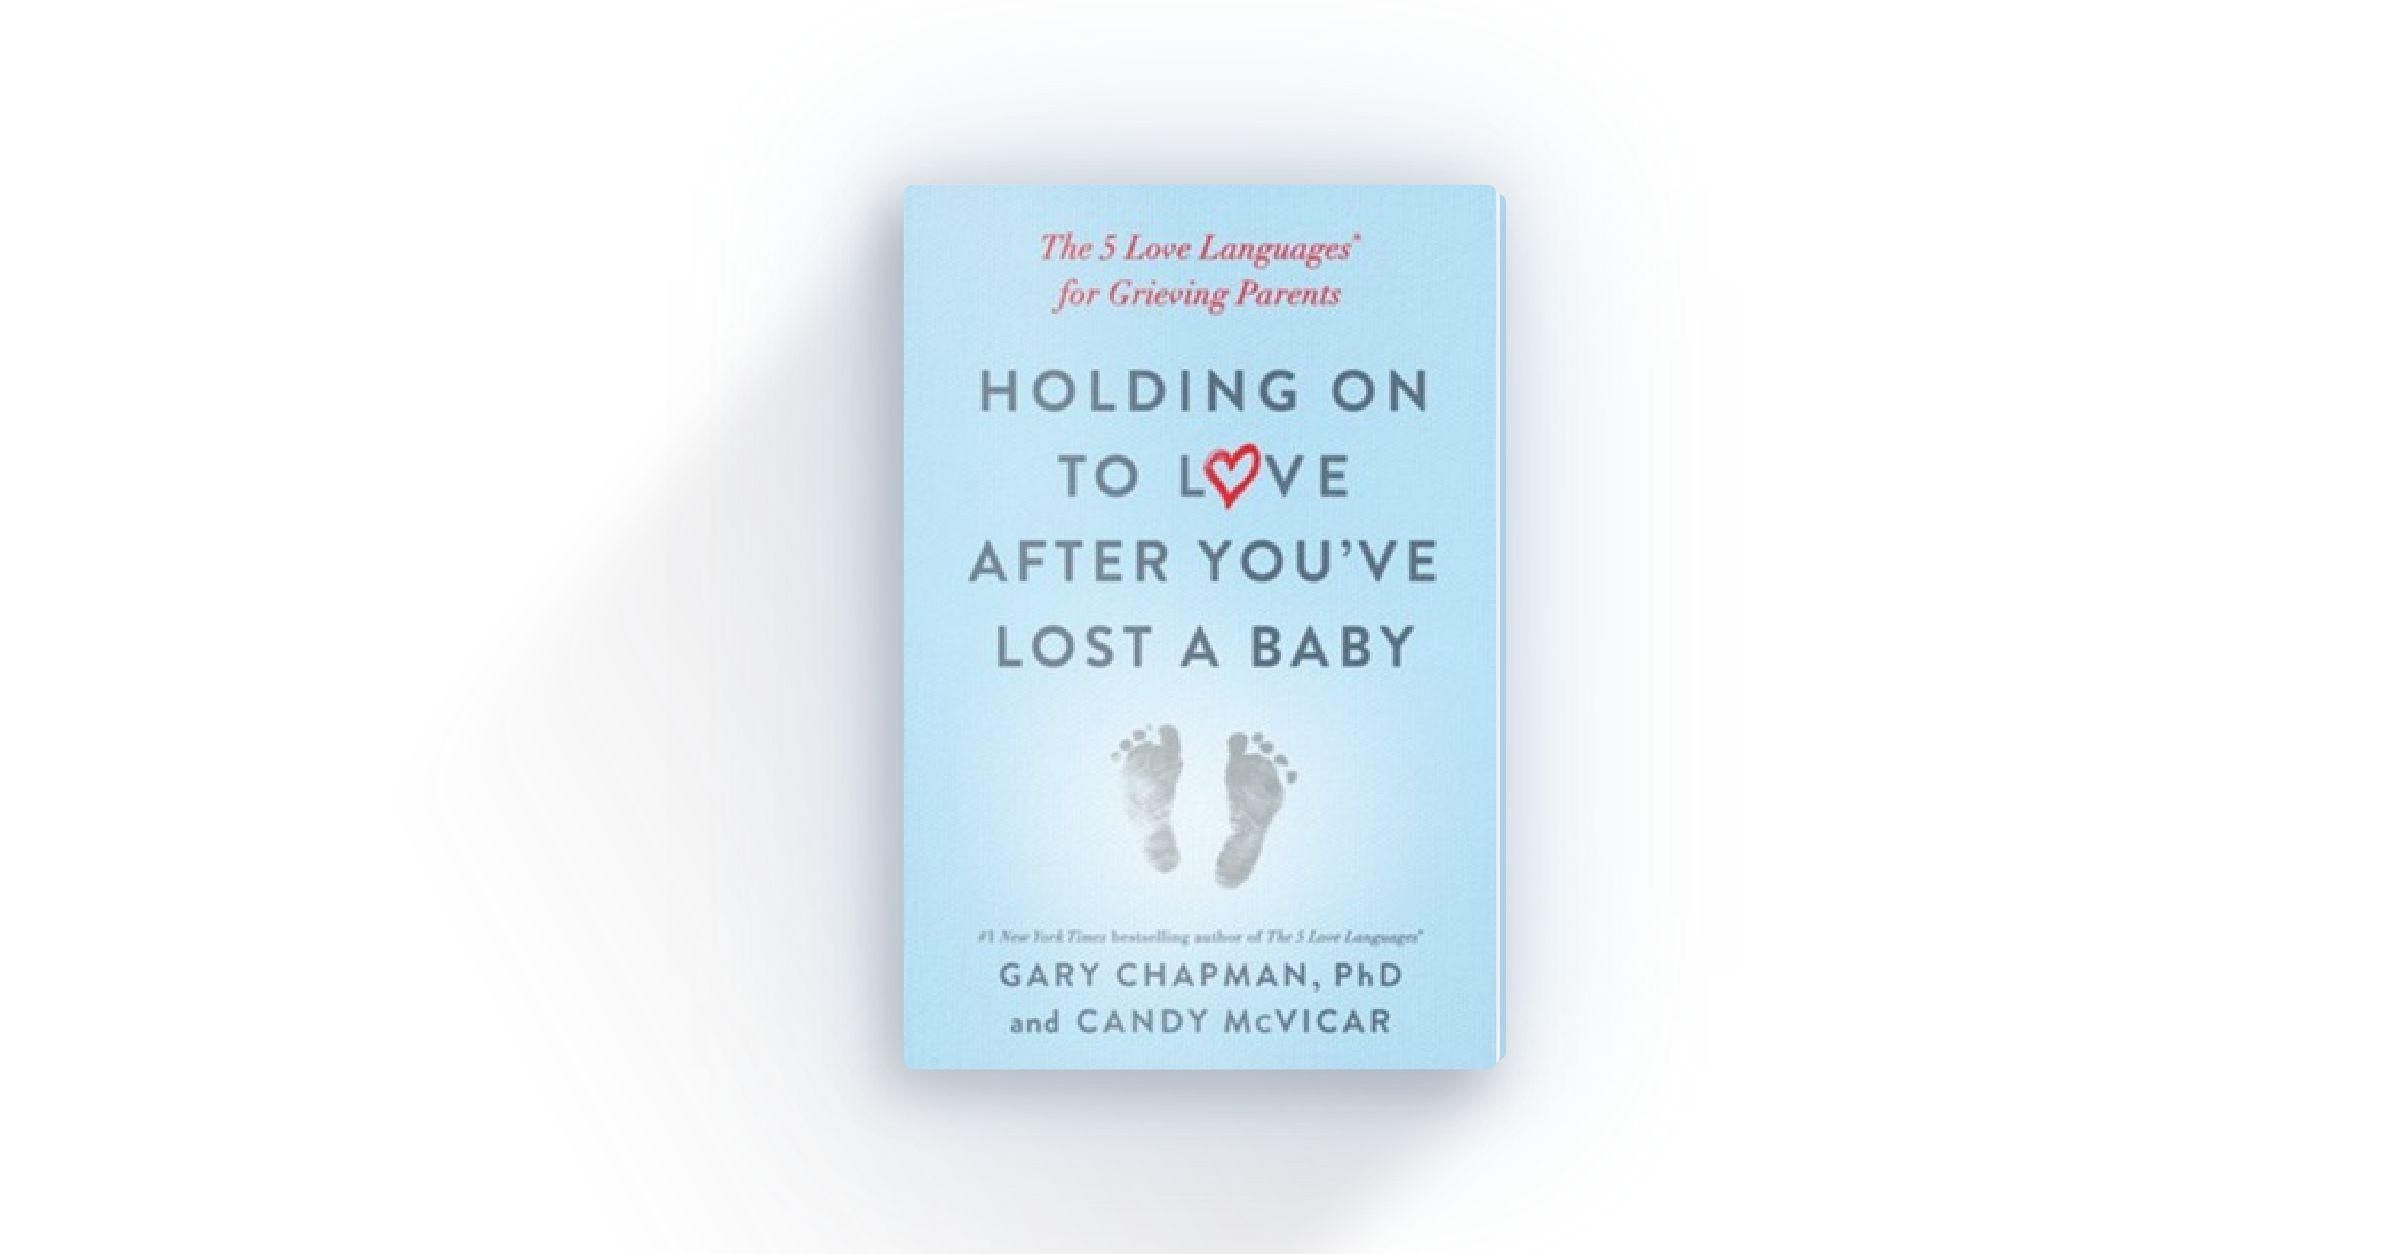 Holding On To Love After You've Lost a Baby